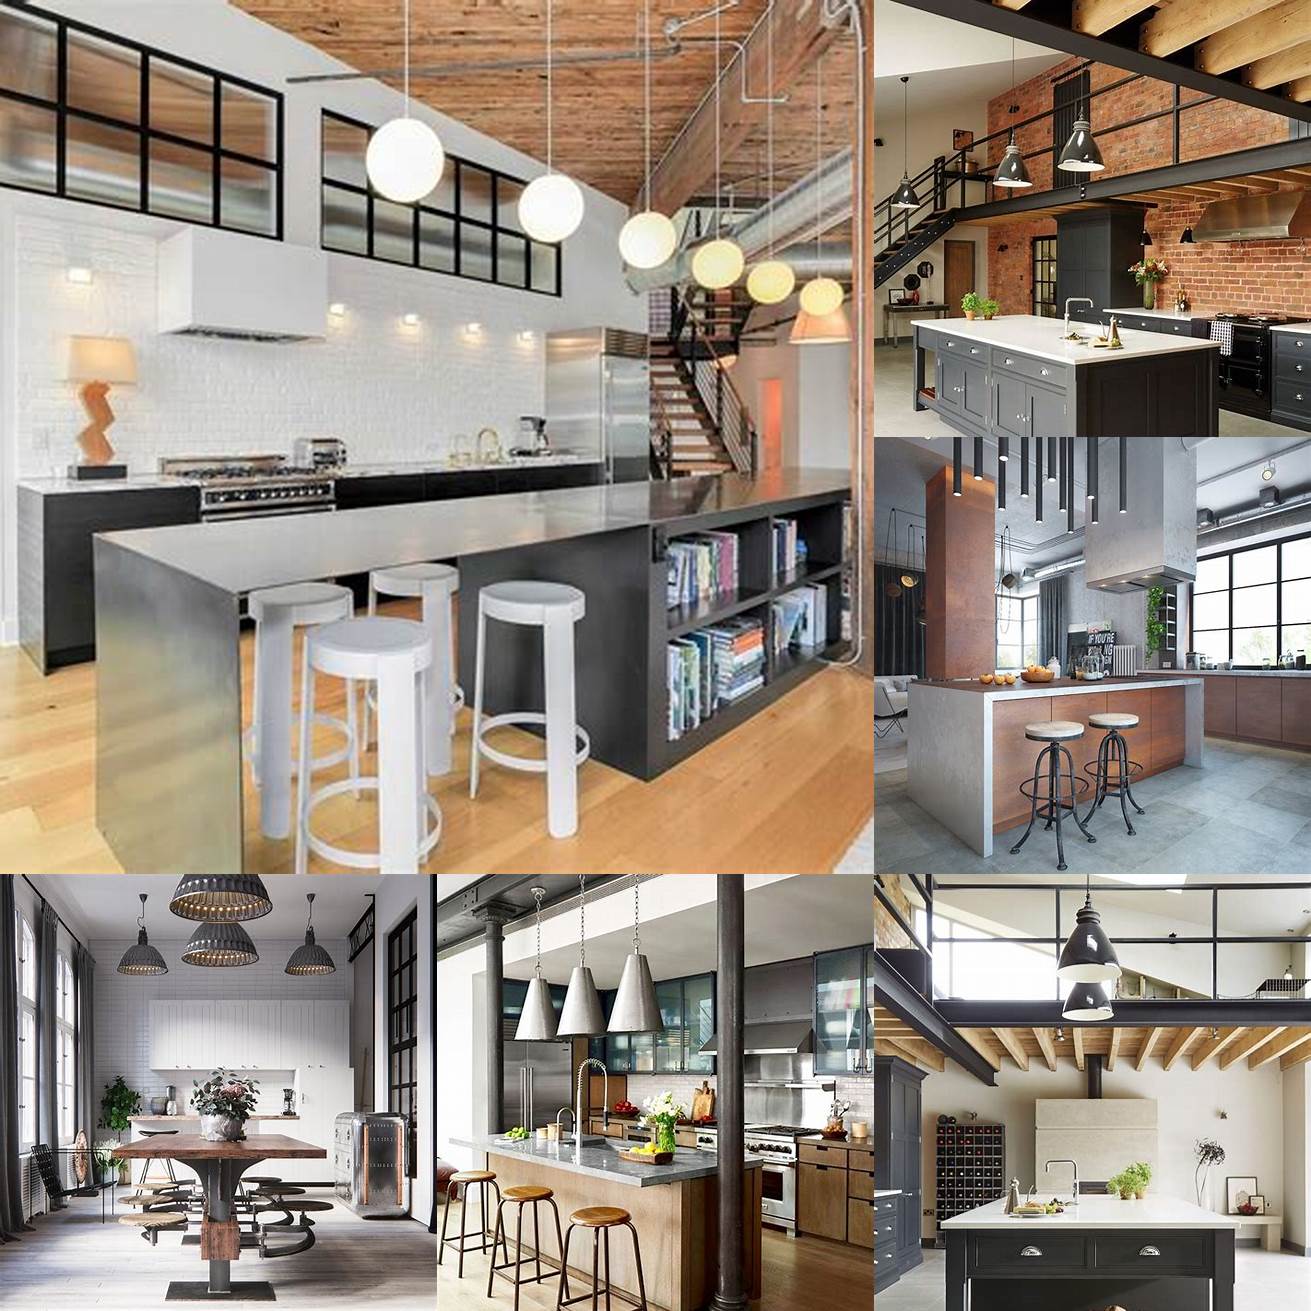 Image of an industrial style kitchen with metal bar stools and an industrial pendant light